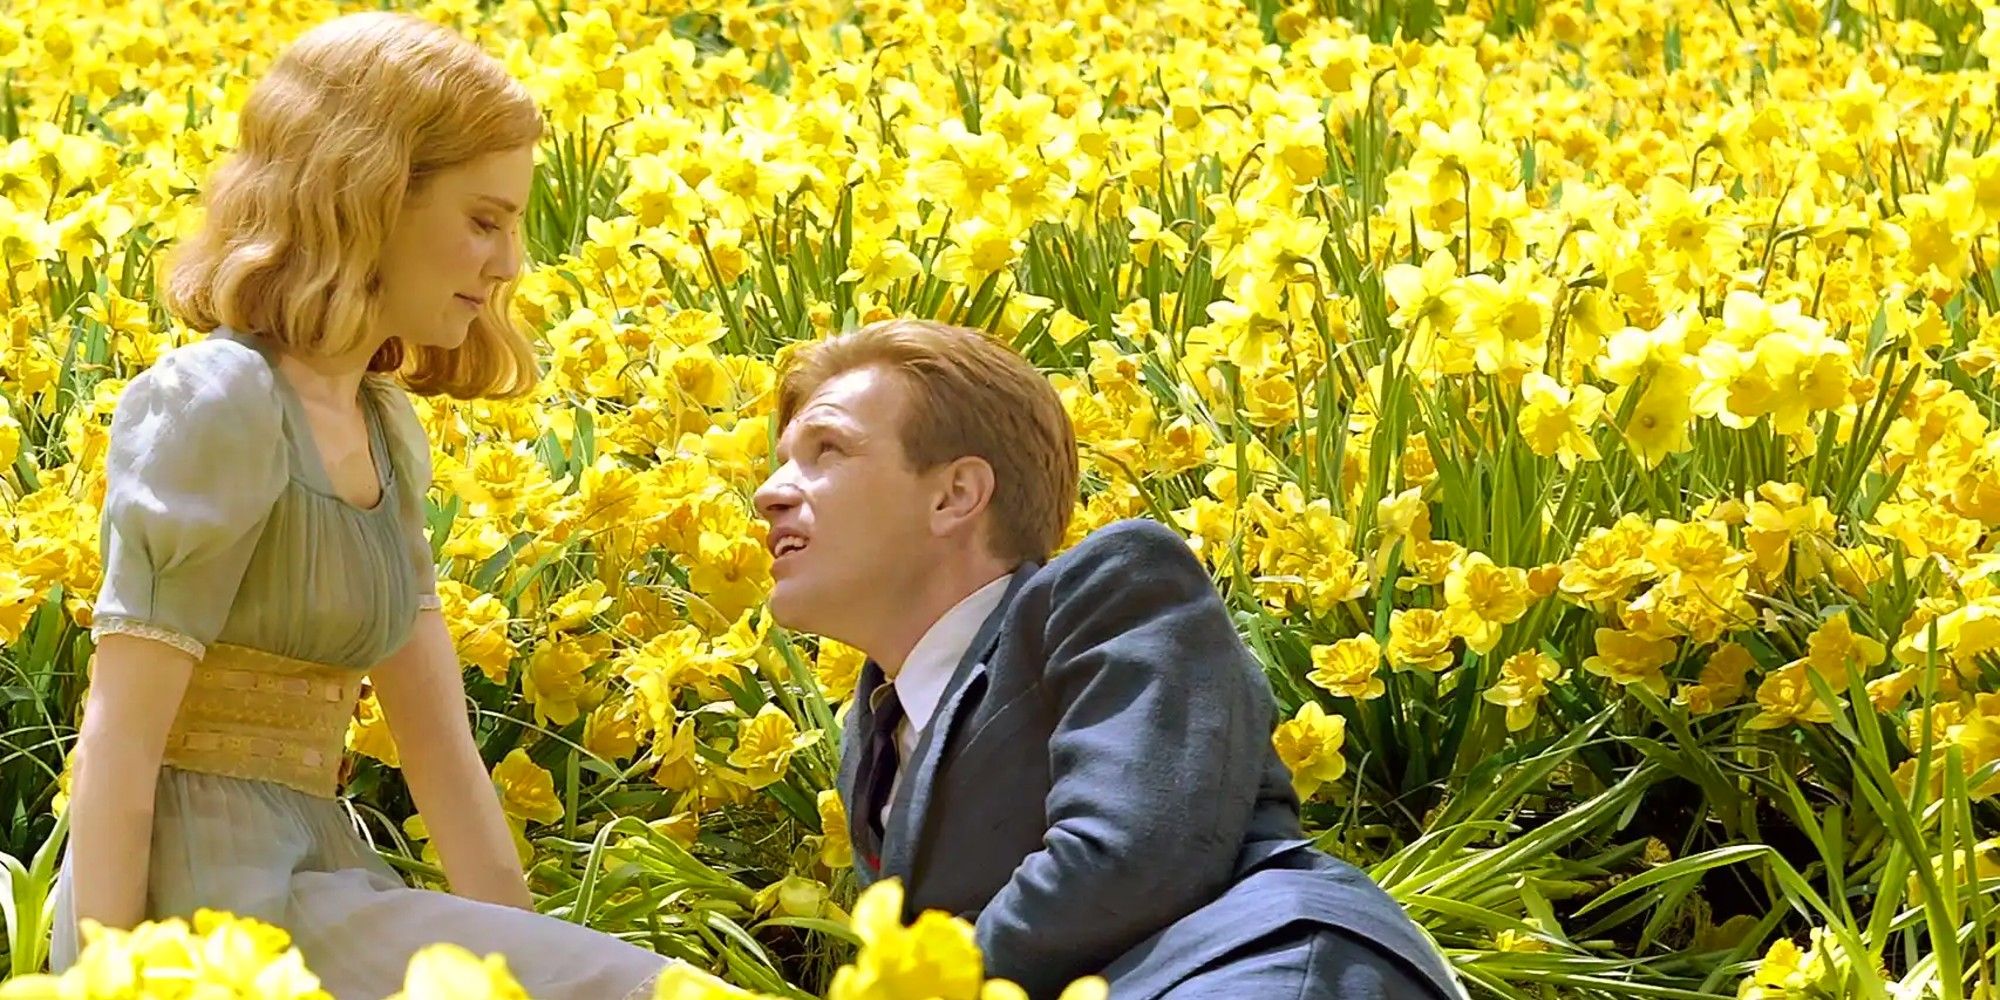 Sandra and Edward in the plantation of daffodils